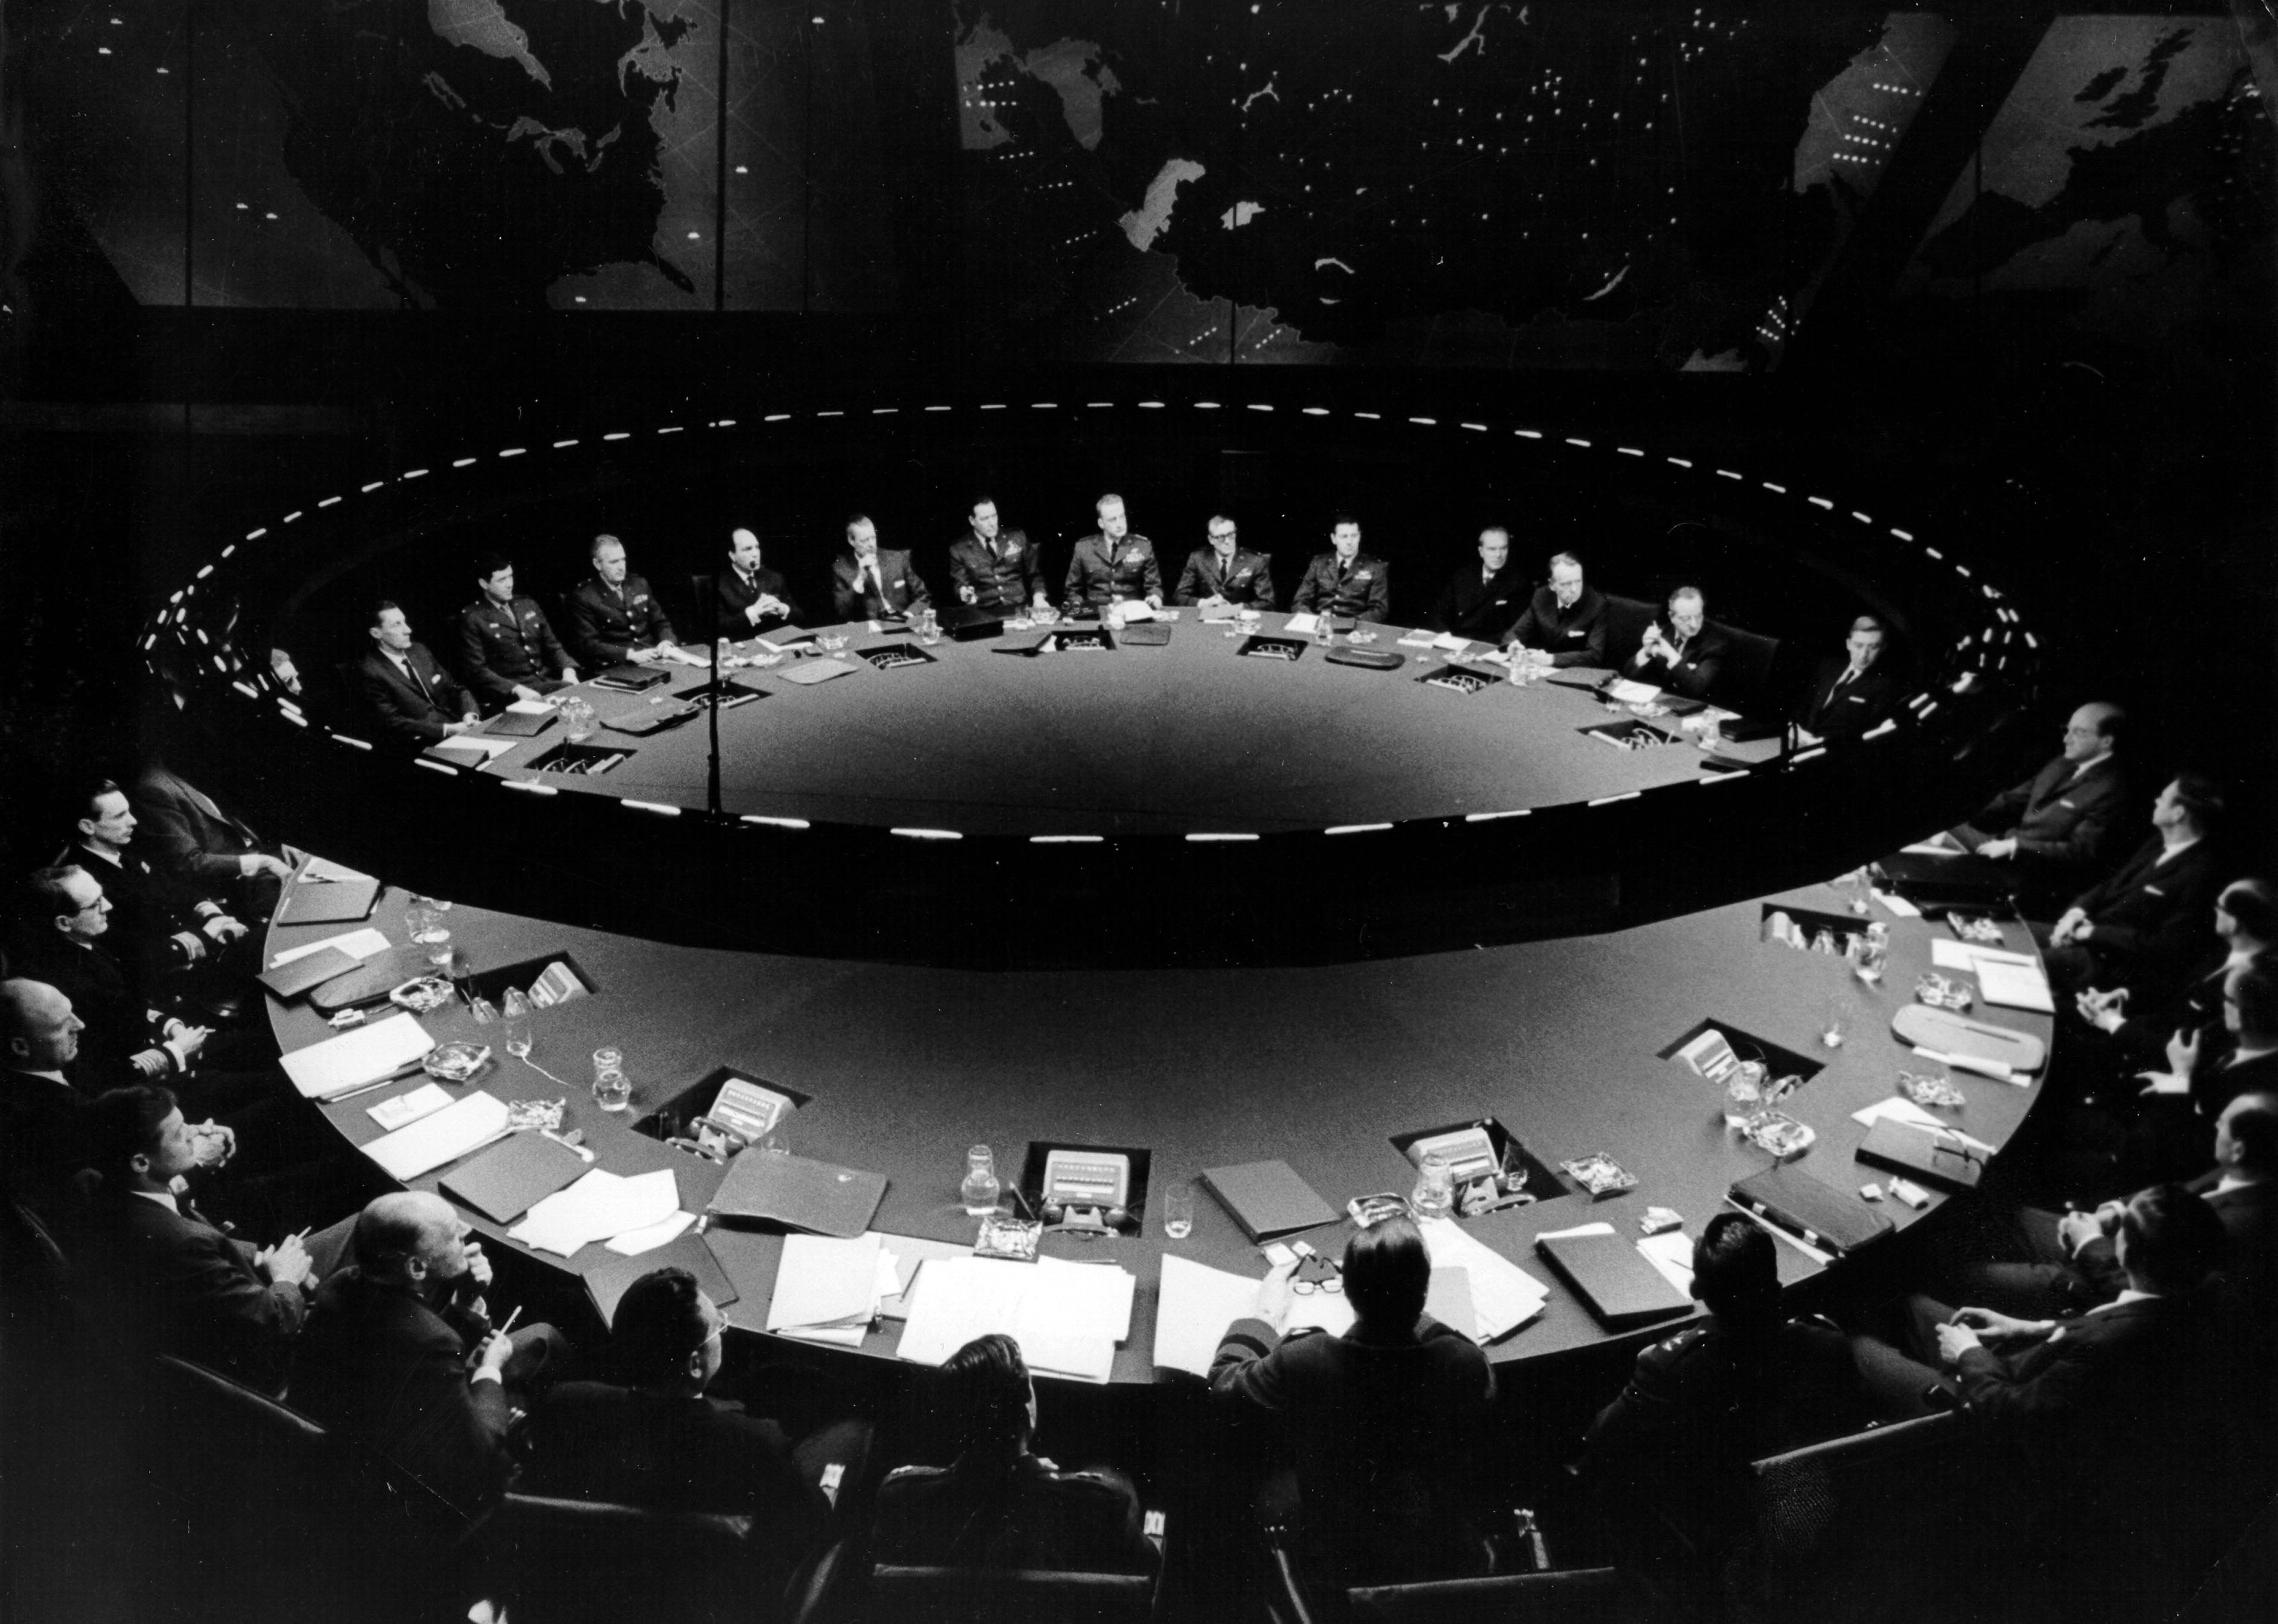 A large round table of men in military uniforms and suits.